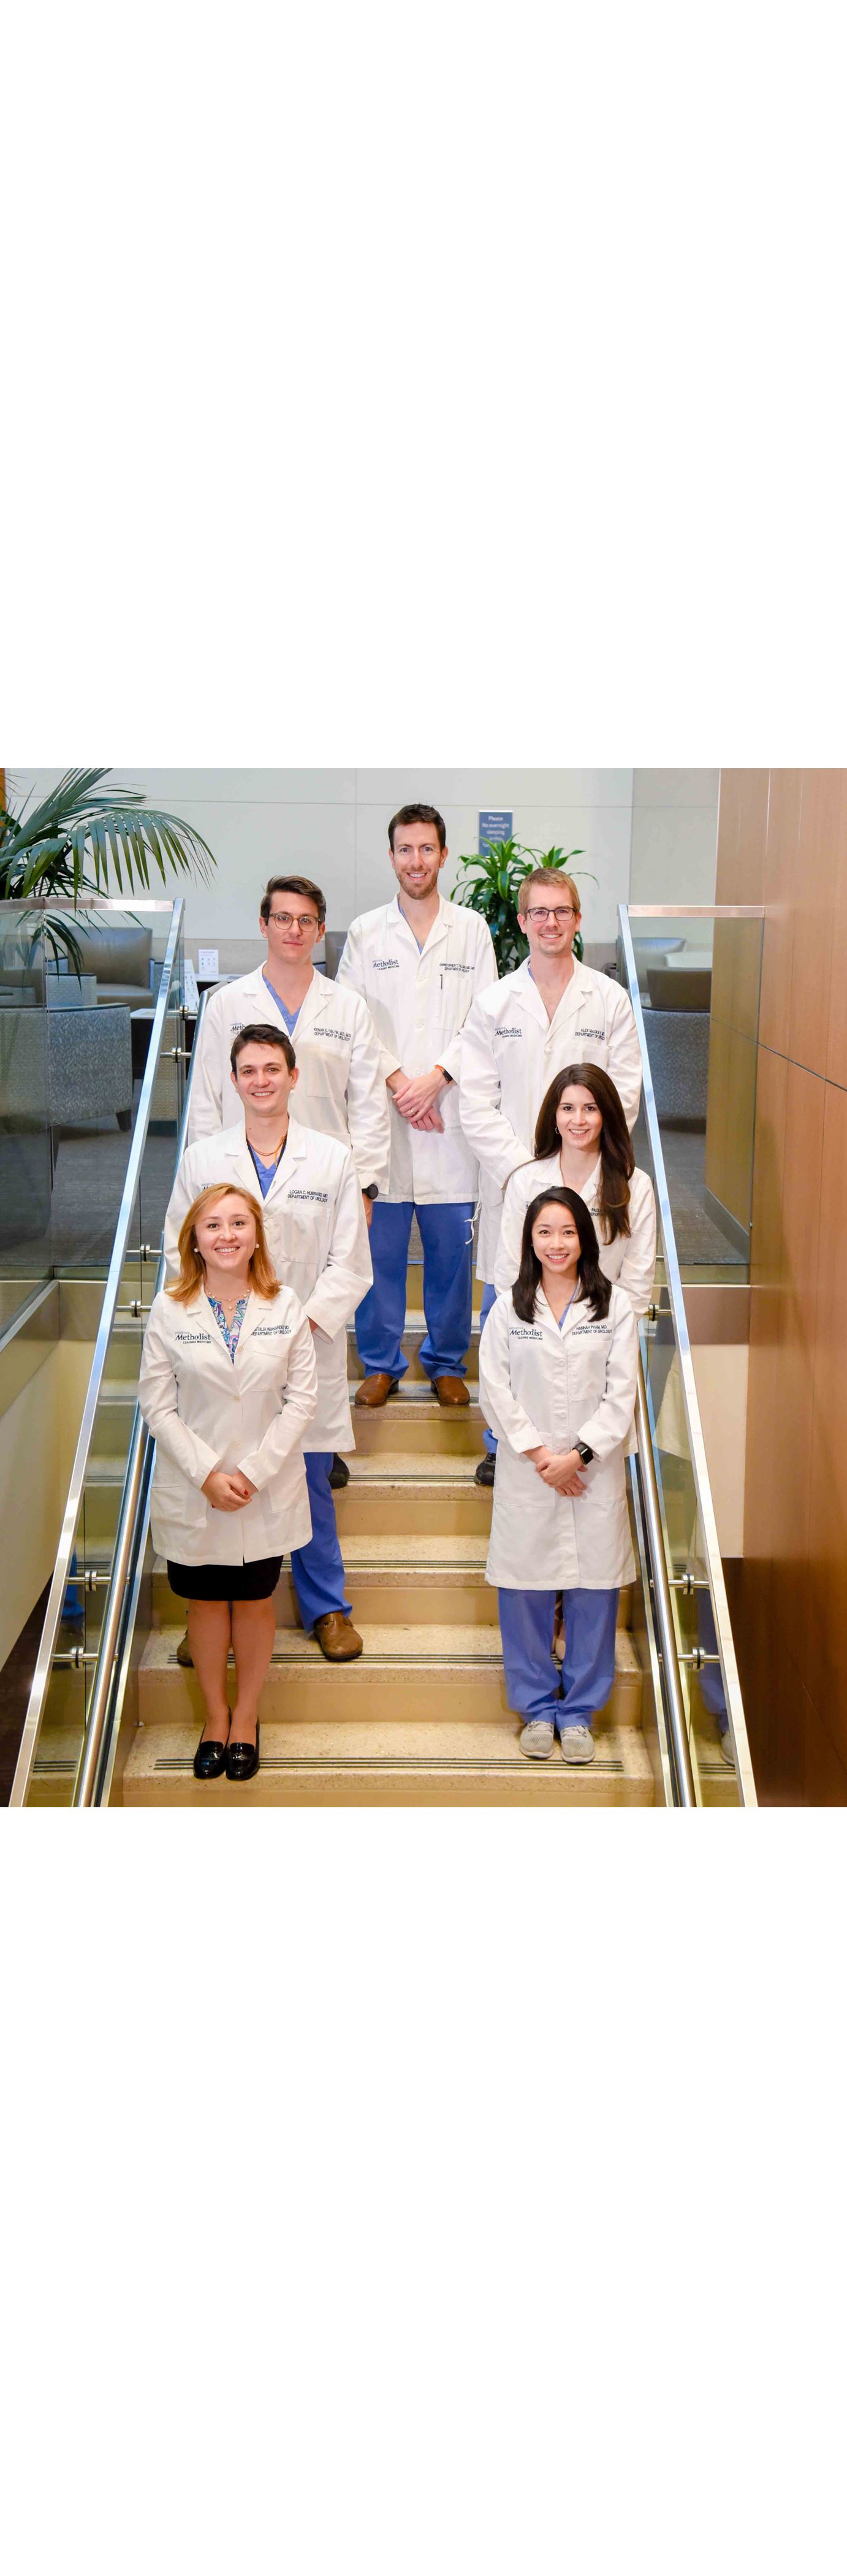 Urology Residents standing on stairway